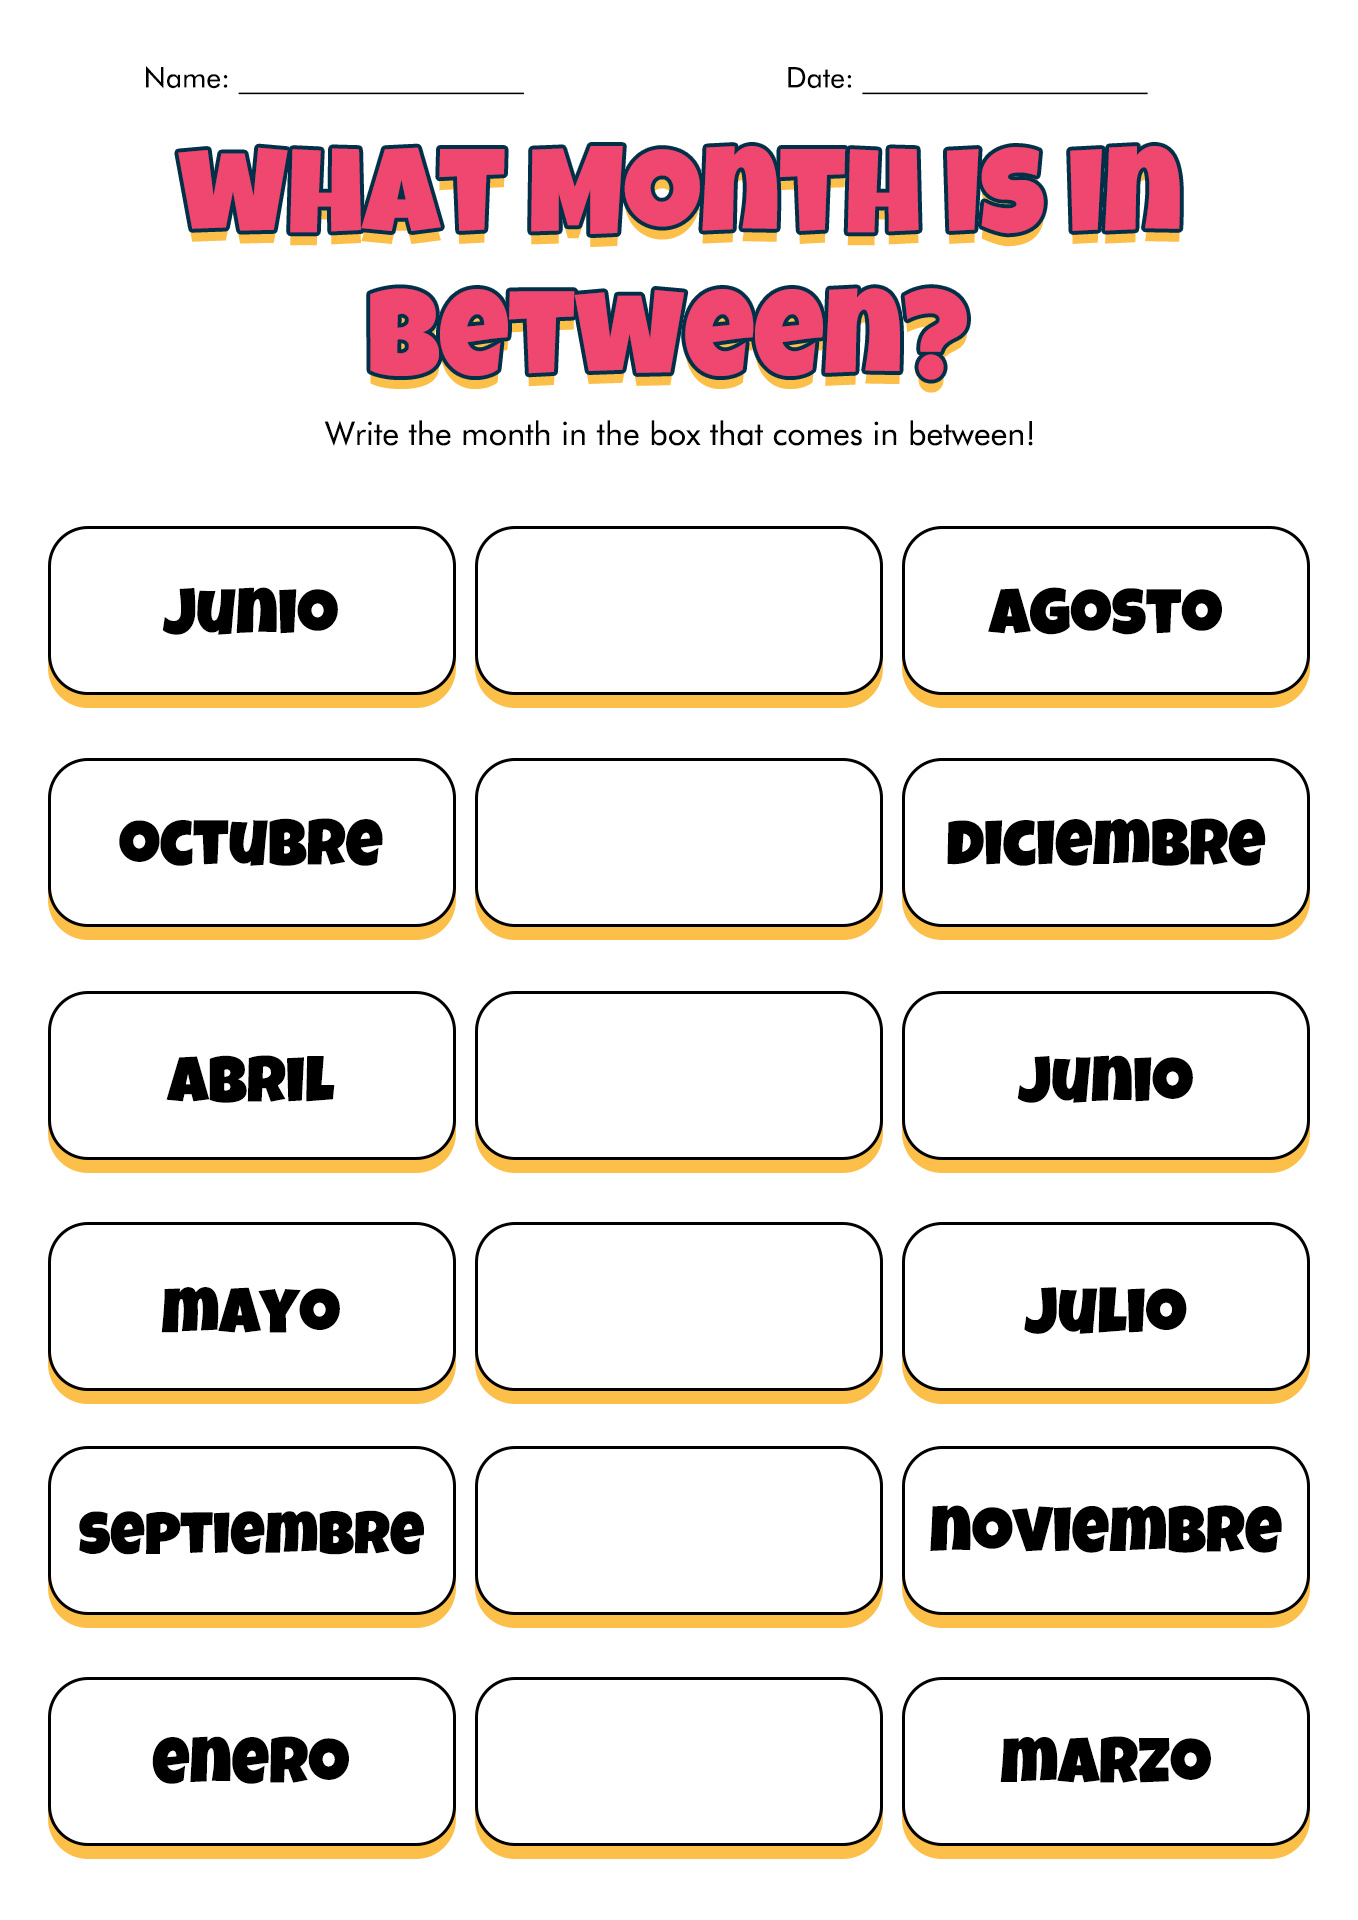 12-best-images-of-spanish-name-worksheets-free-printable-spanish-worksheets-months-spanish